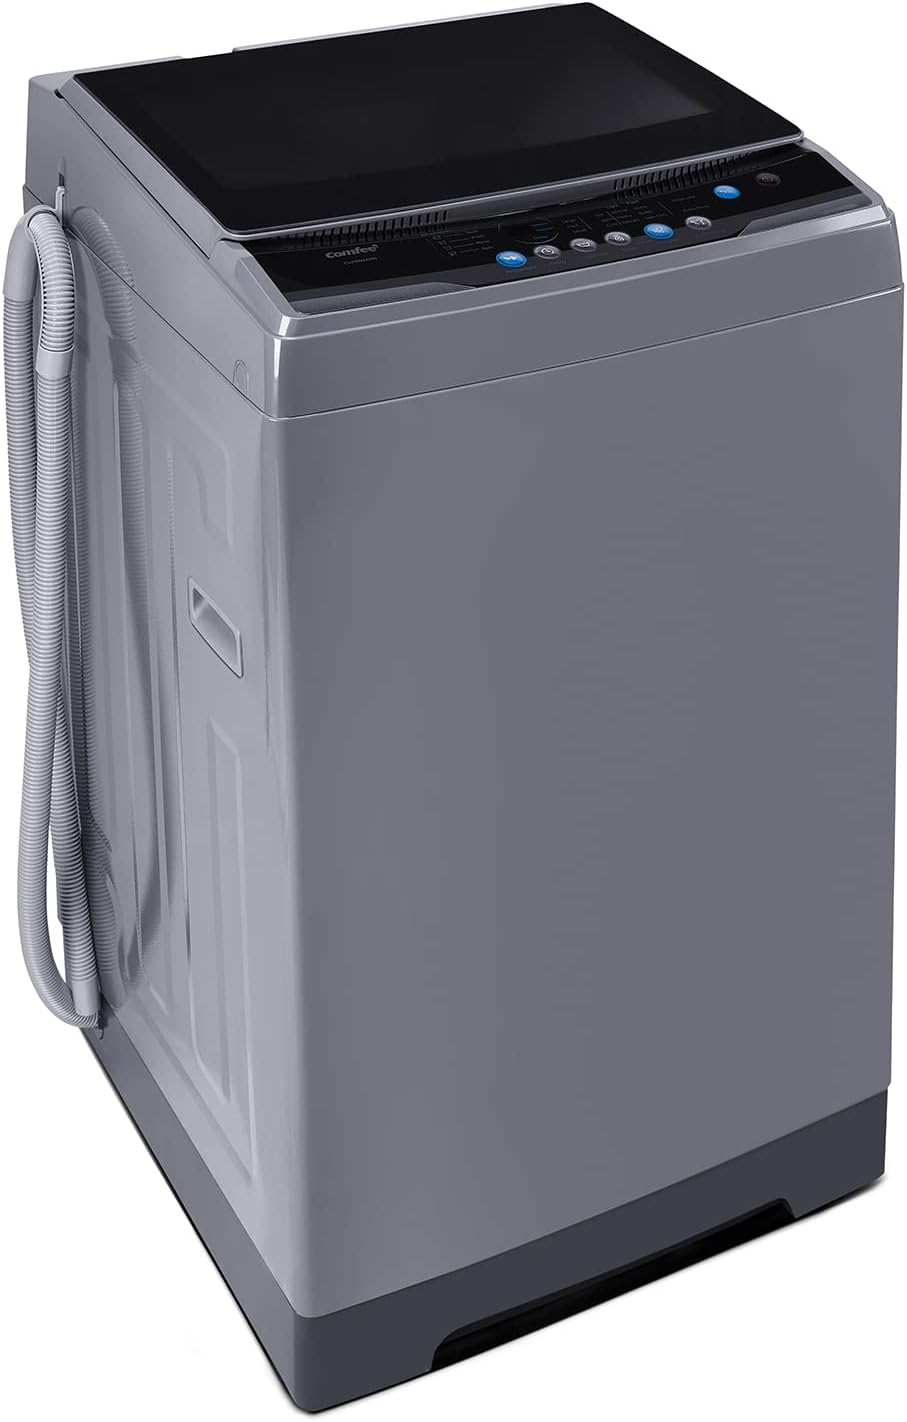 Read more about the article COMFEE’ 1.6 Cu.ft Portable Washing Machine, 11lbs Capacity Fully Automatic Compact Washer with Wheels for ONLY $319.00 (Was $349.00)